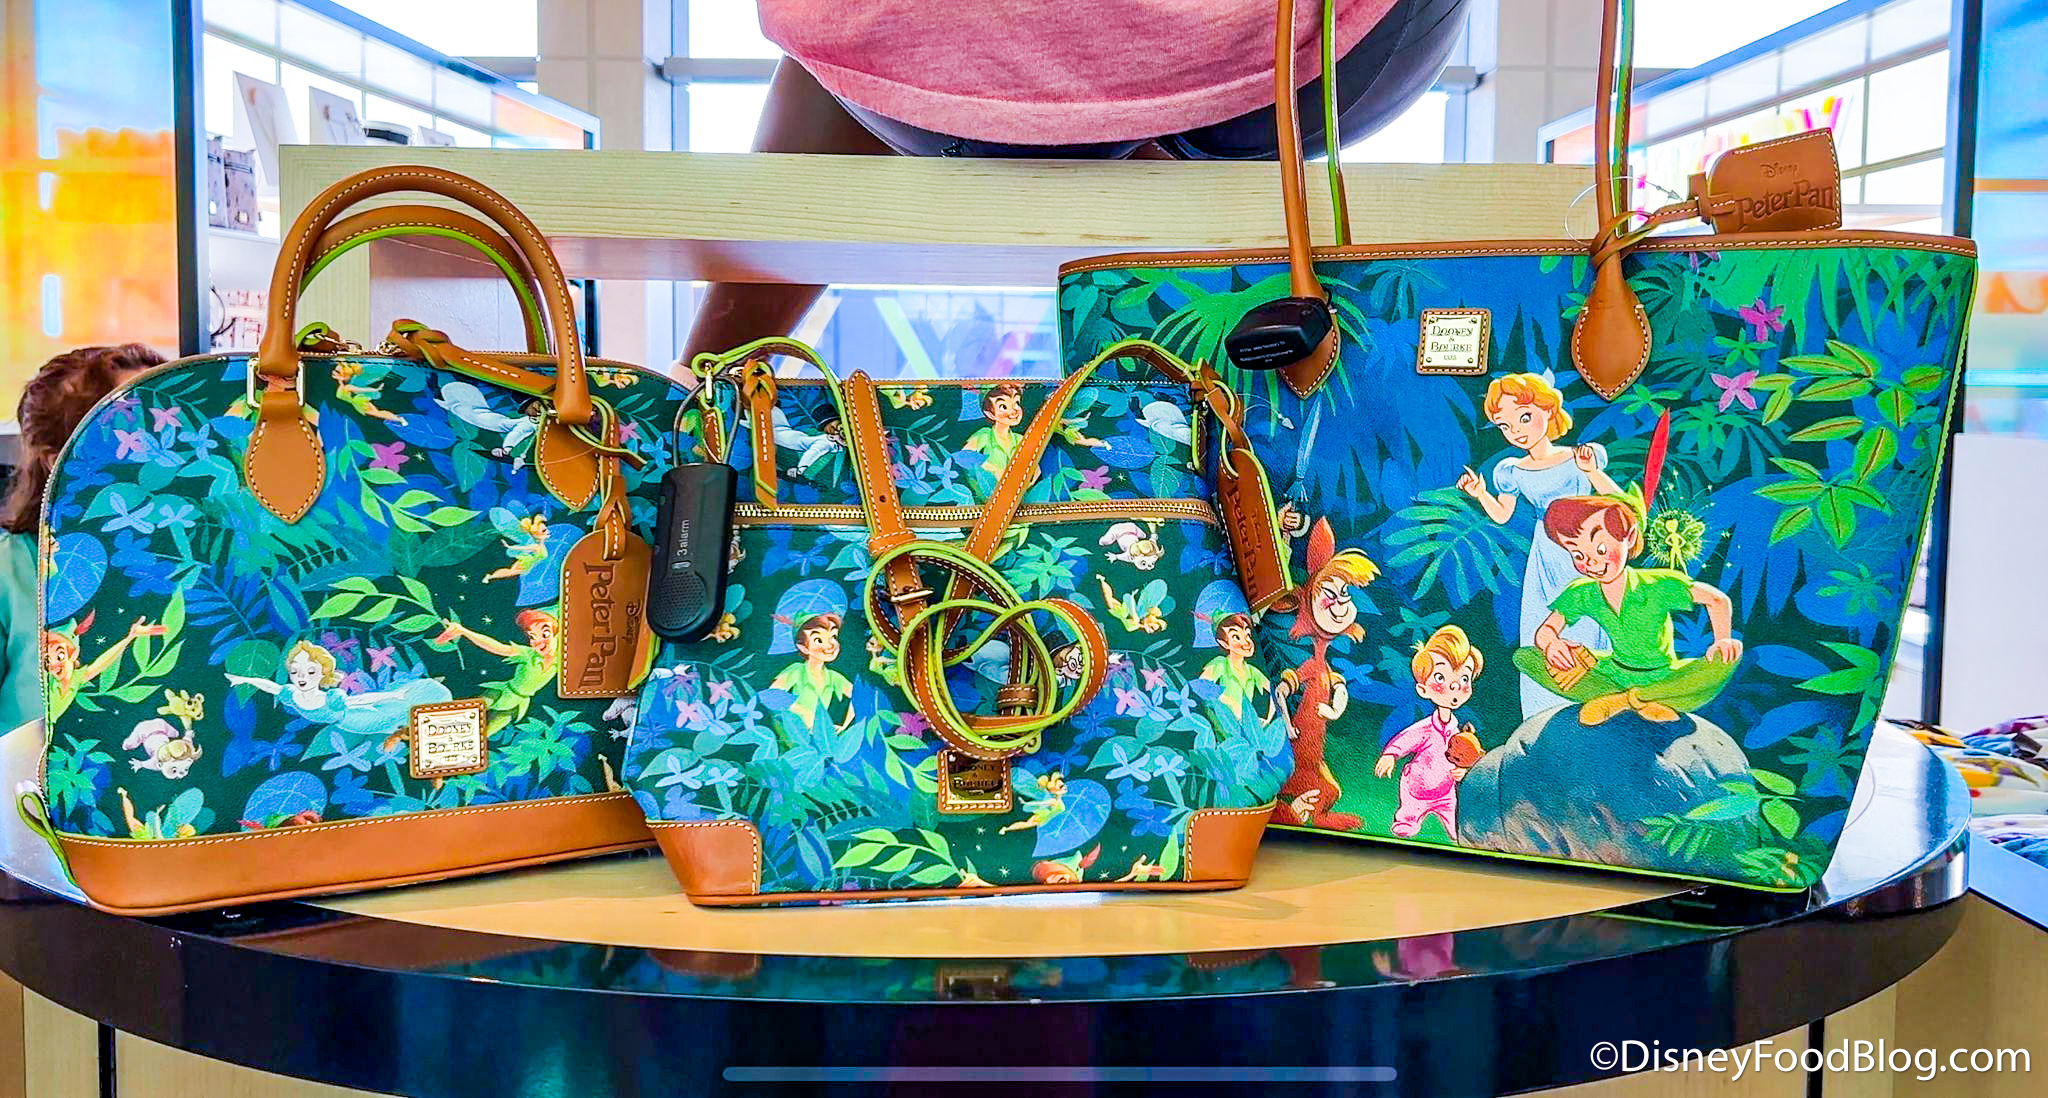 Peter Pan' Dooney & Bourke Bags Are Now Available in Disney World